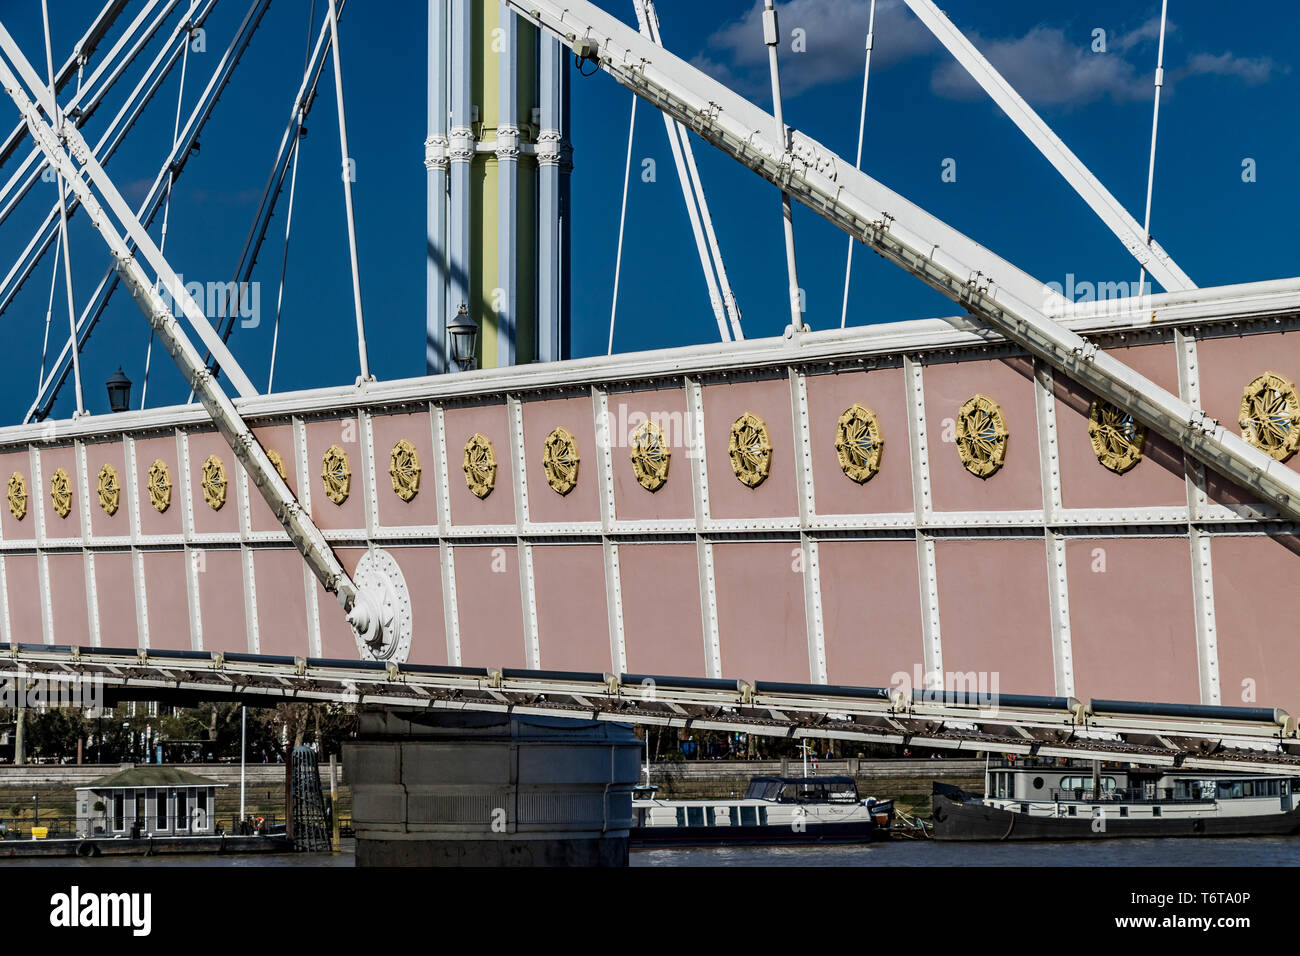 Close up of  the main crossing platform of the Albert Bridge, Chelsea ,which crosses the River Thames between Battersea and Chelsea, London, UK Stock Photo